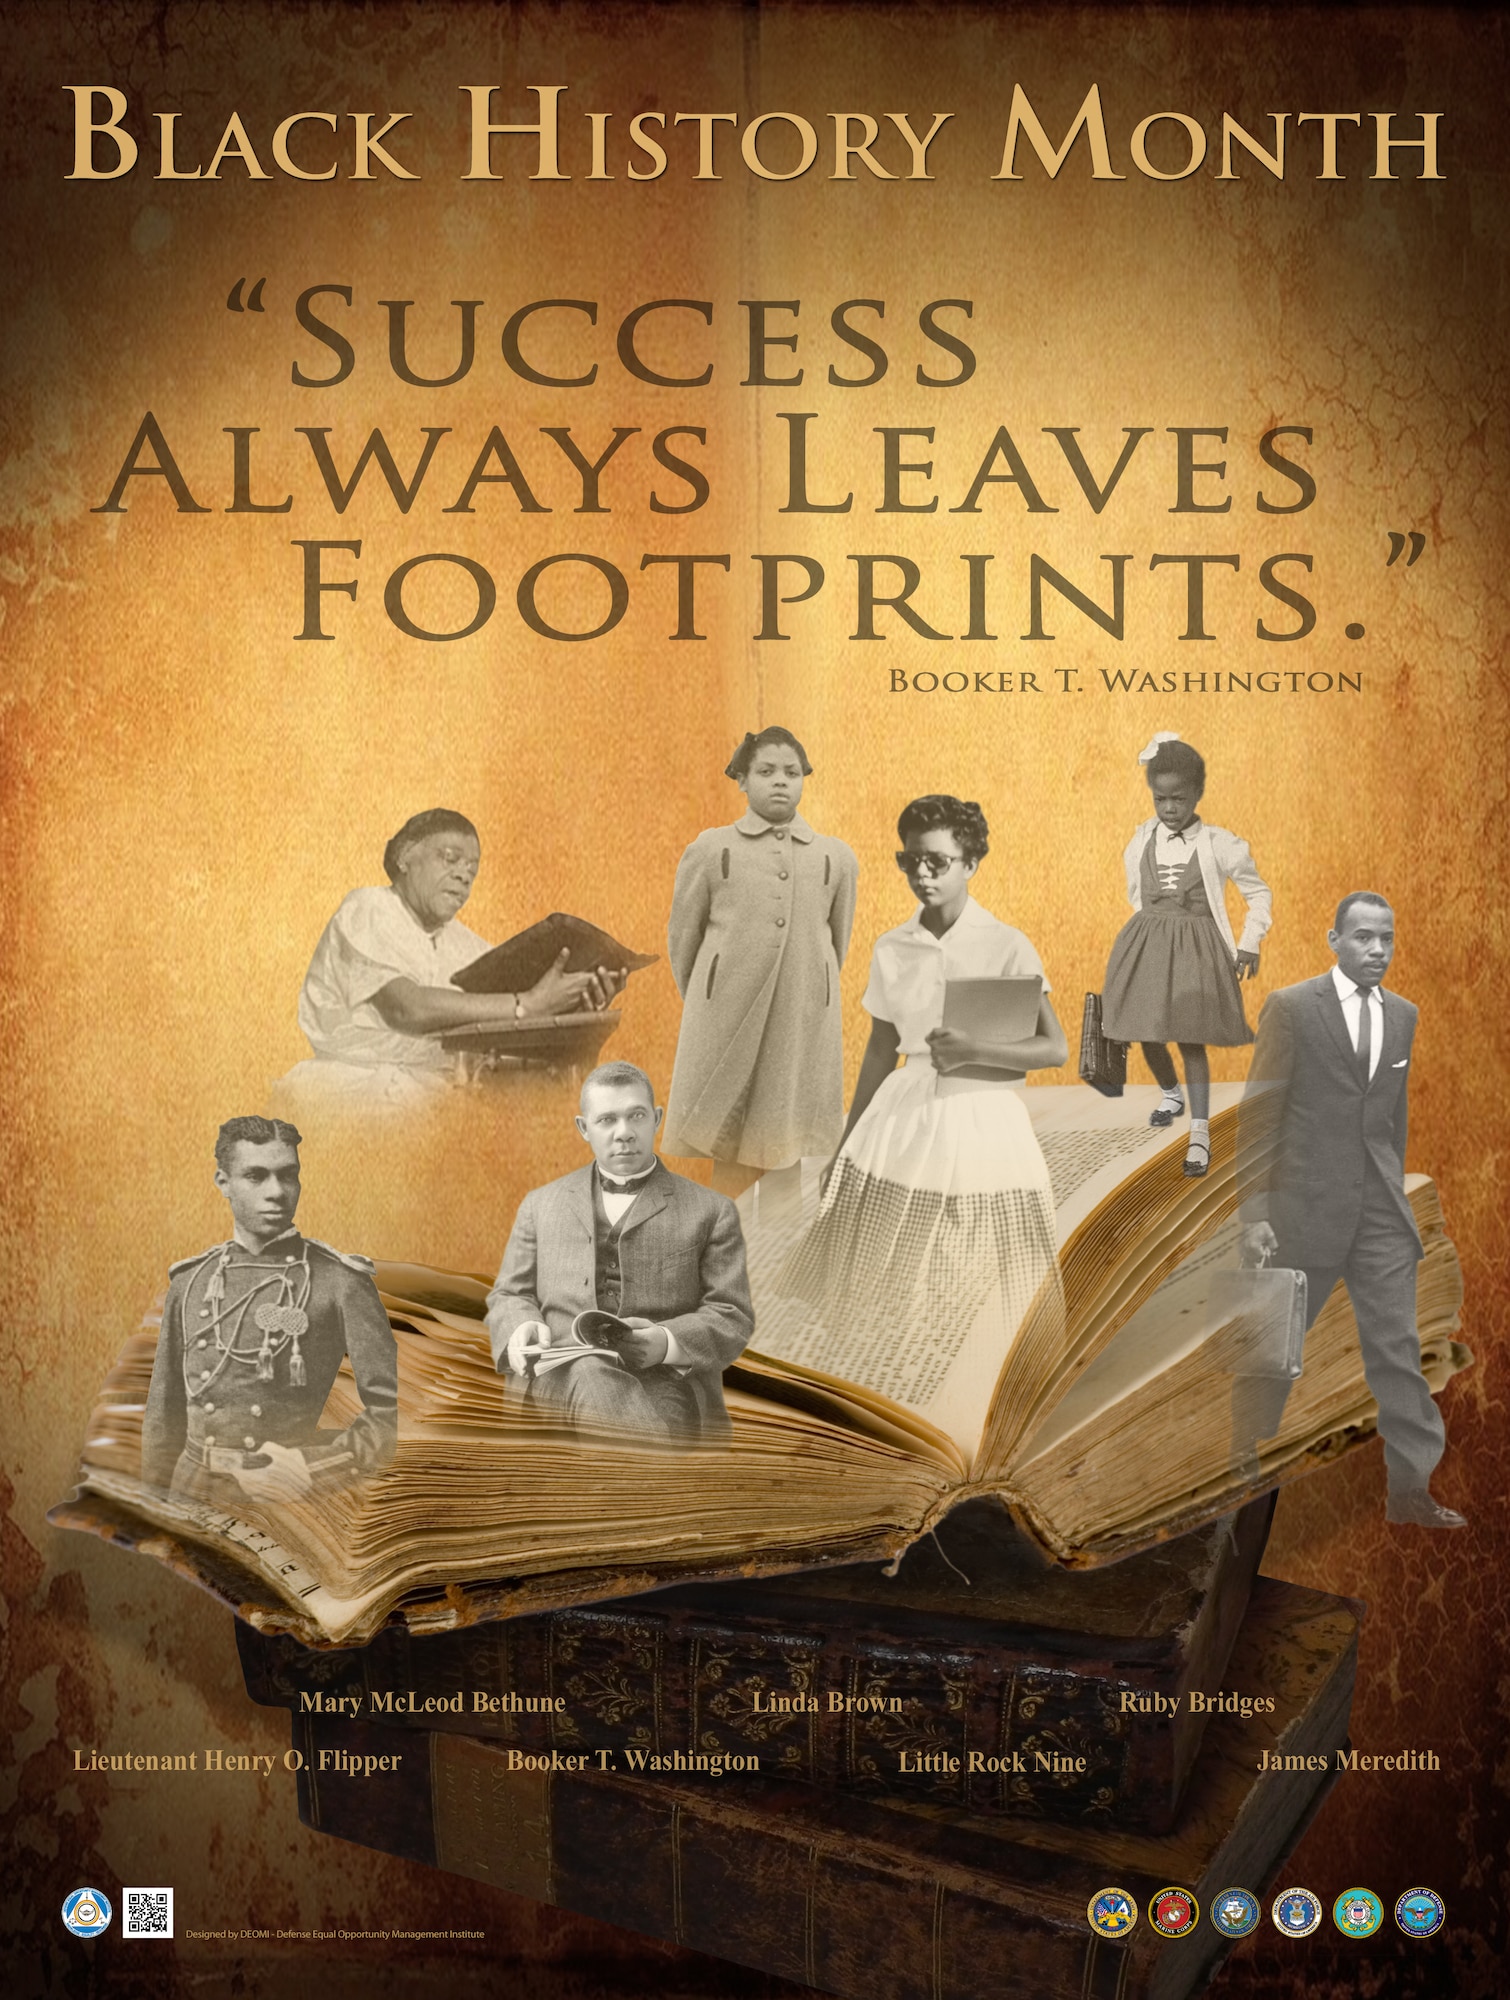 Black History Month poster with images of famous African Americans and the quote "Success always leaves footprints" by Booker T. Washington.